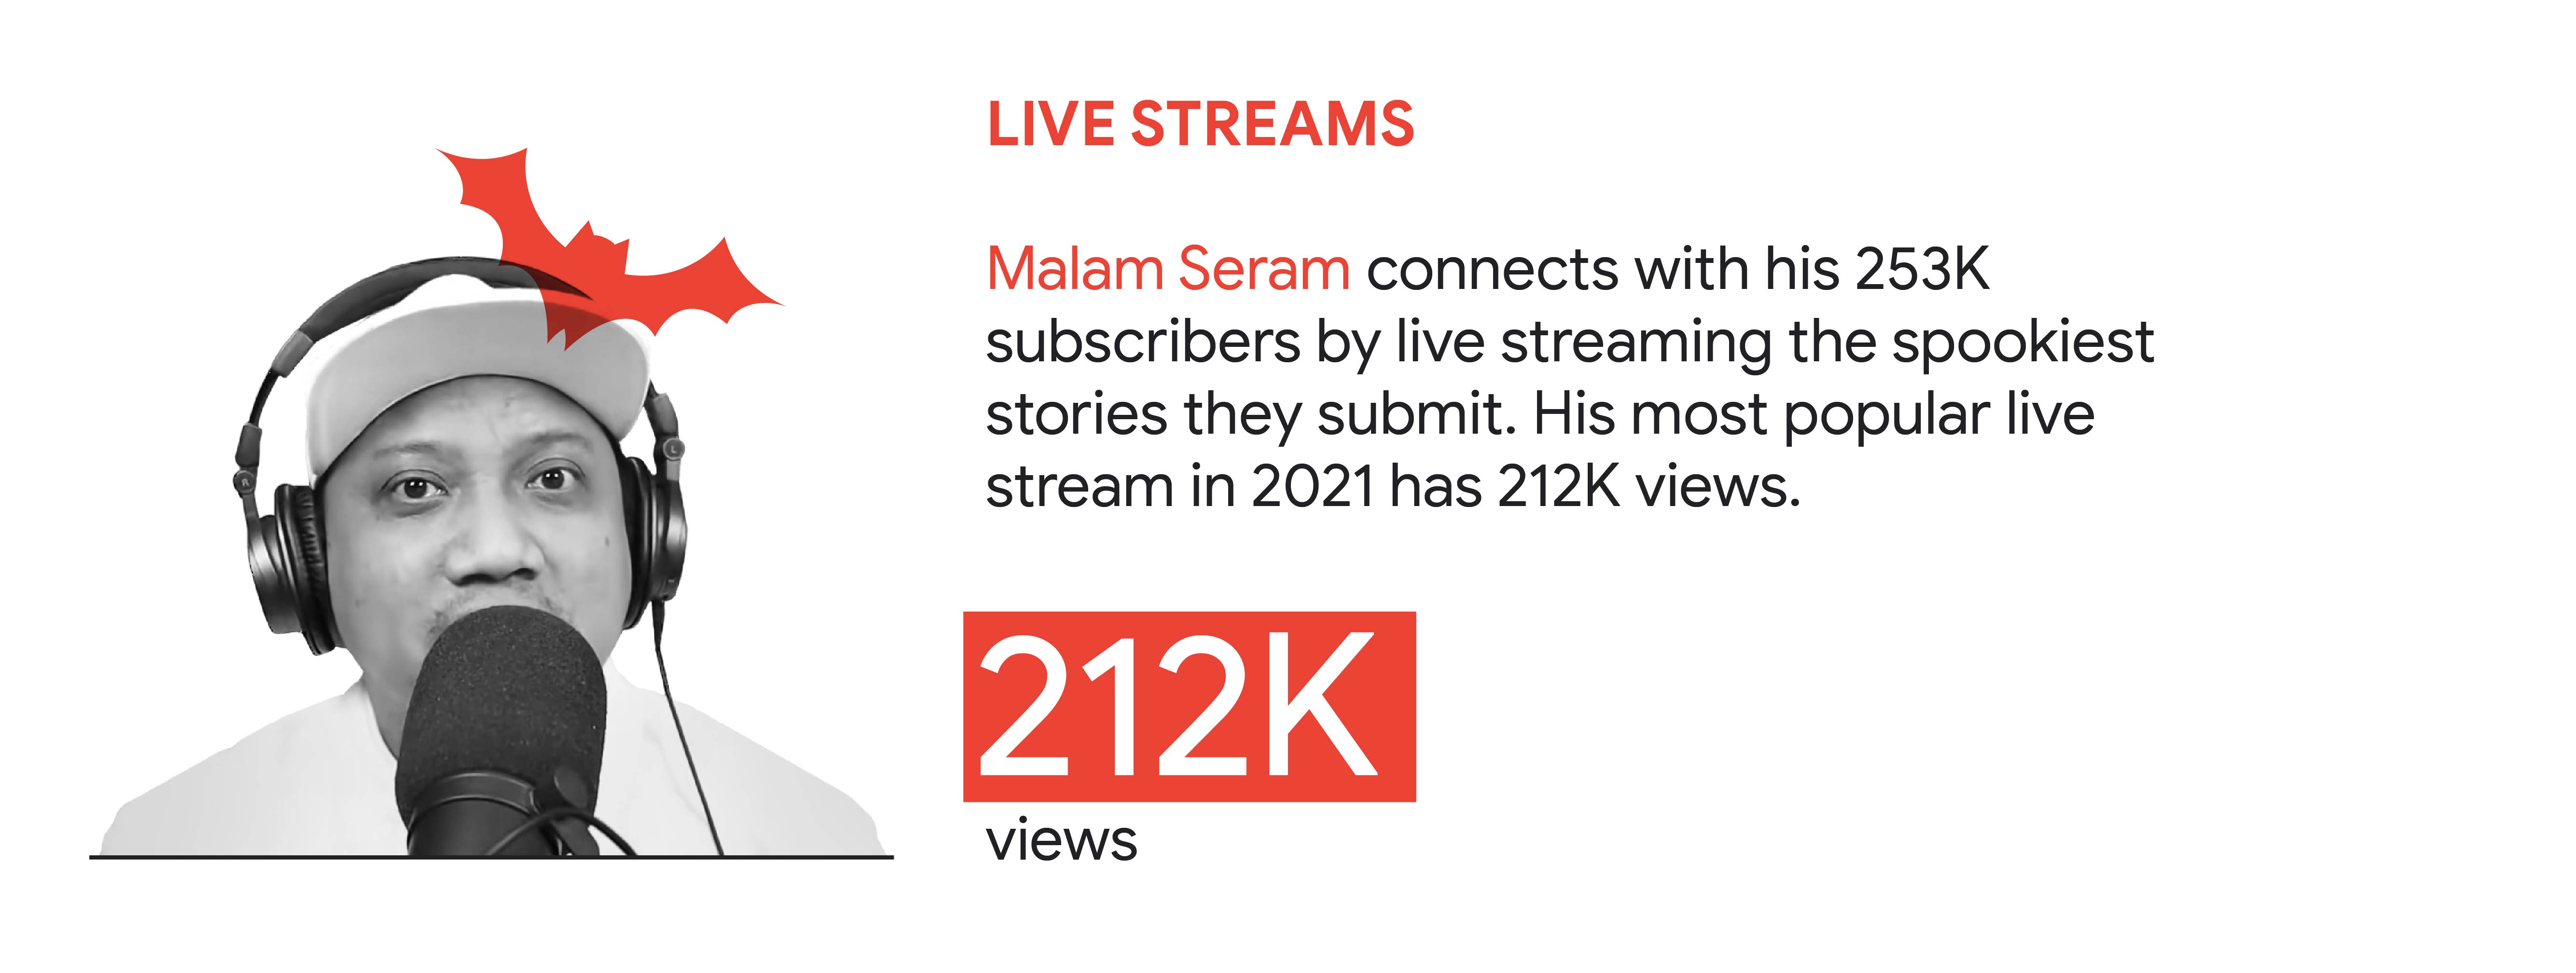 YouTube trend 2: Live streams. In Singapore, Malam Seram connects with his 253K subscribers by live streaming the spookiest stories they submit. His most popular live stream in 2021 has 212K views.